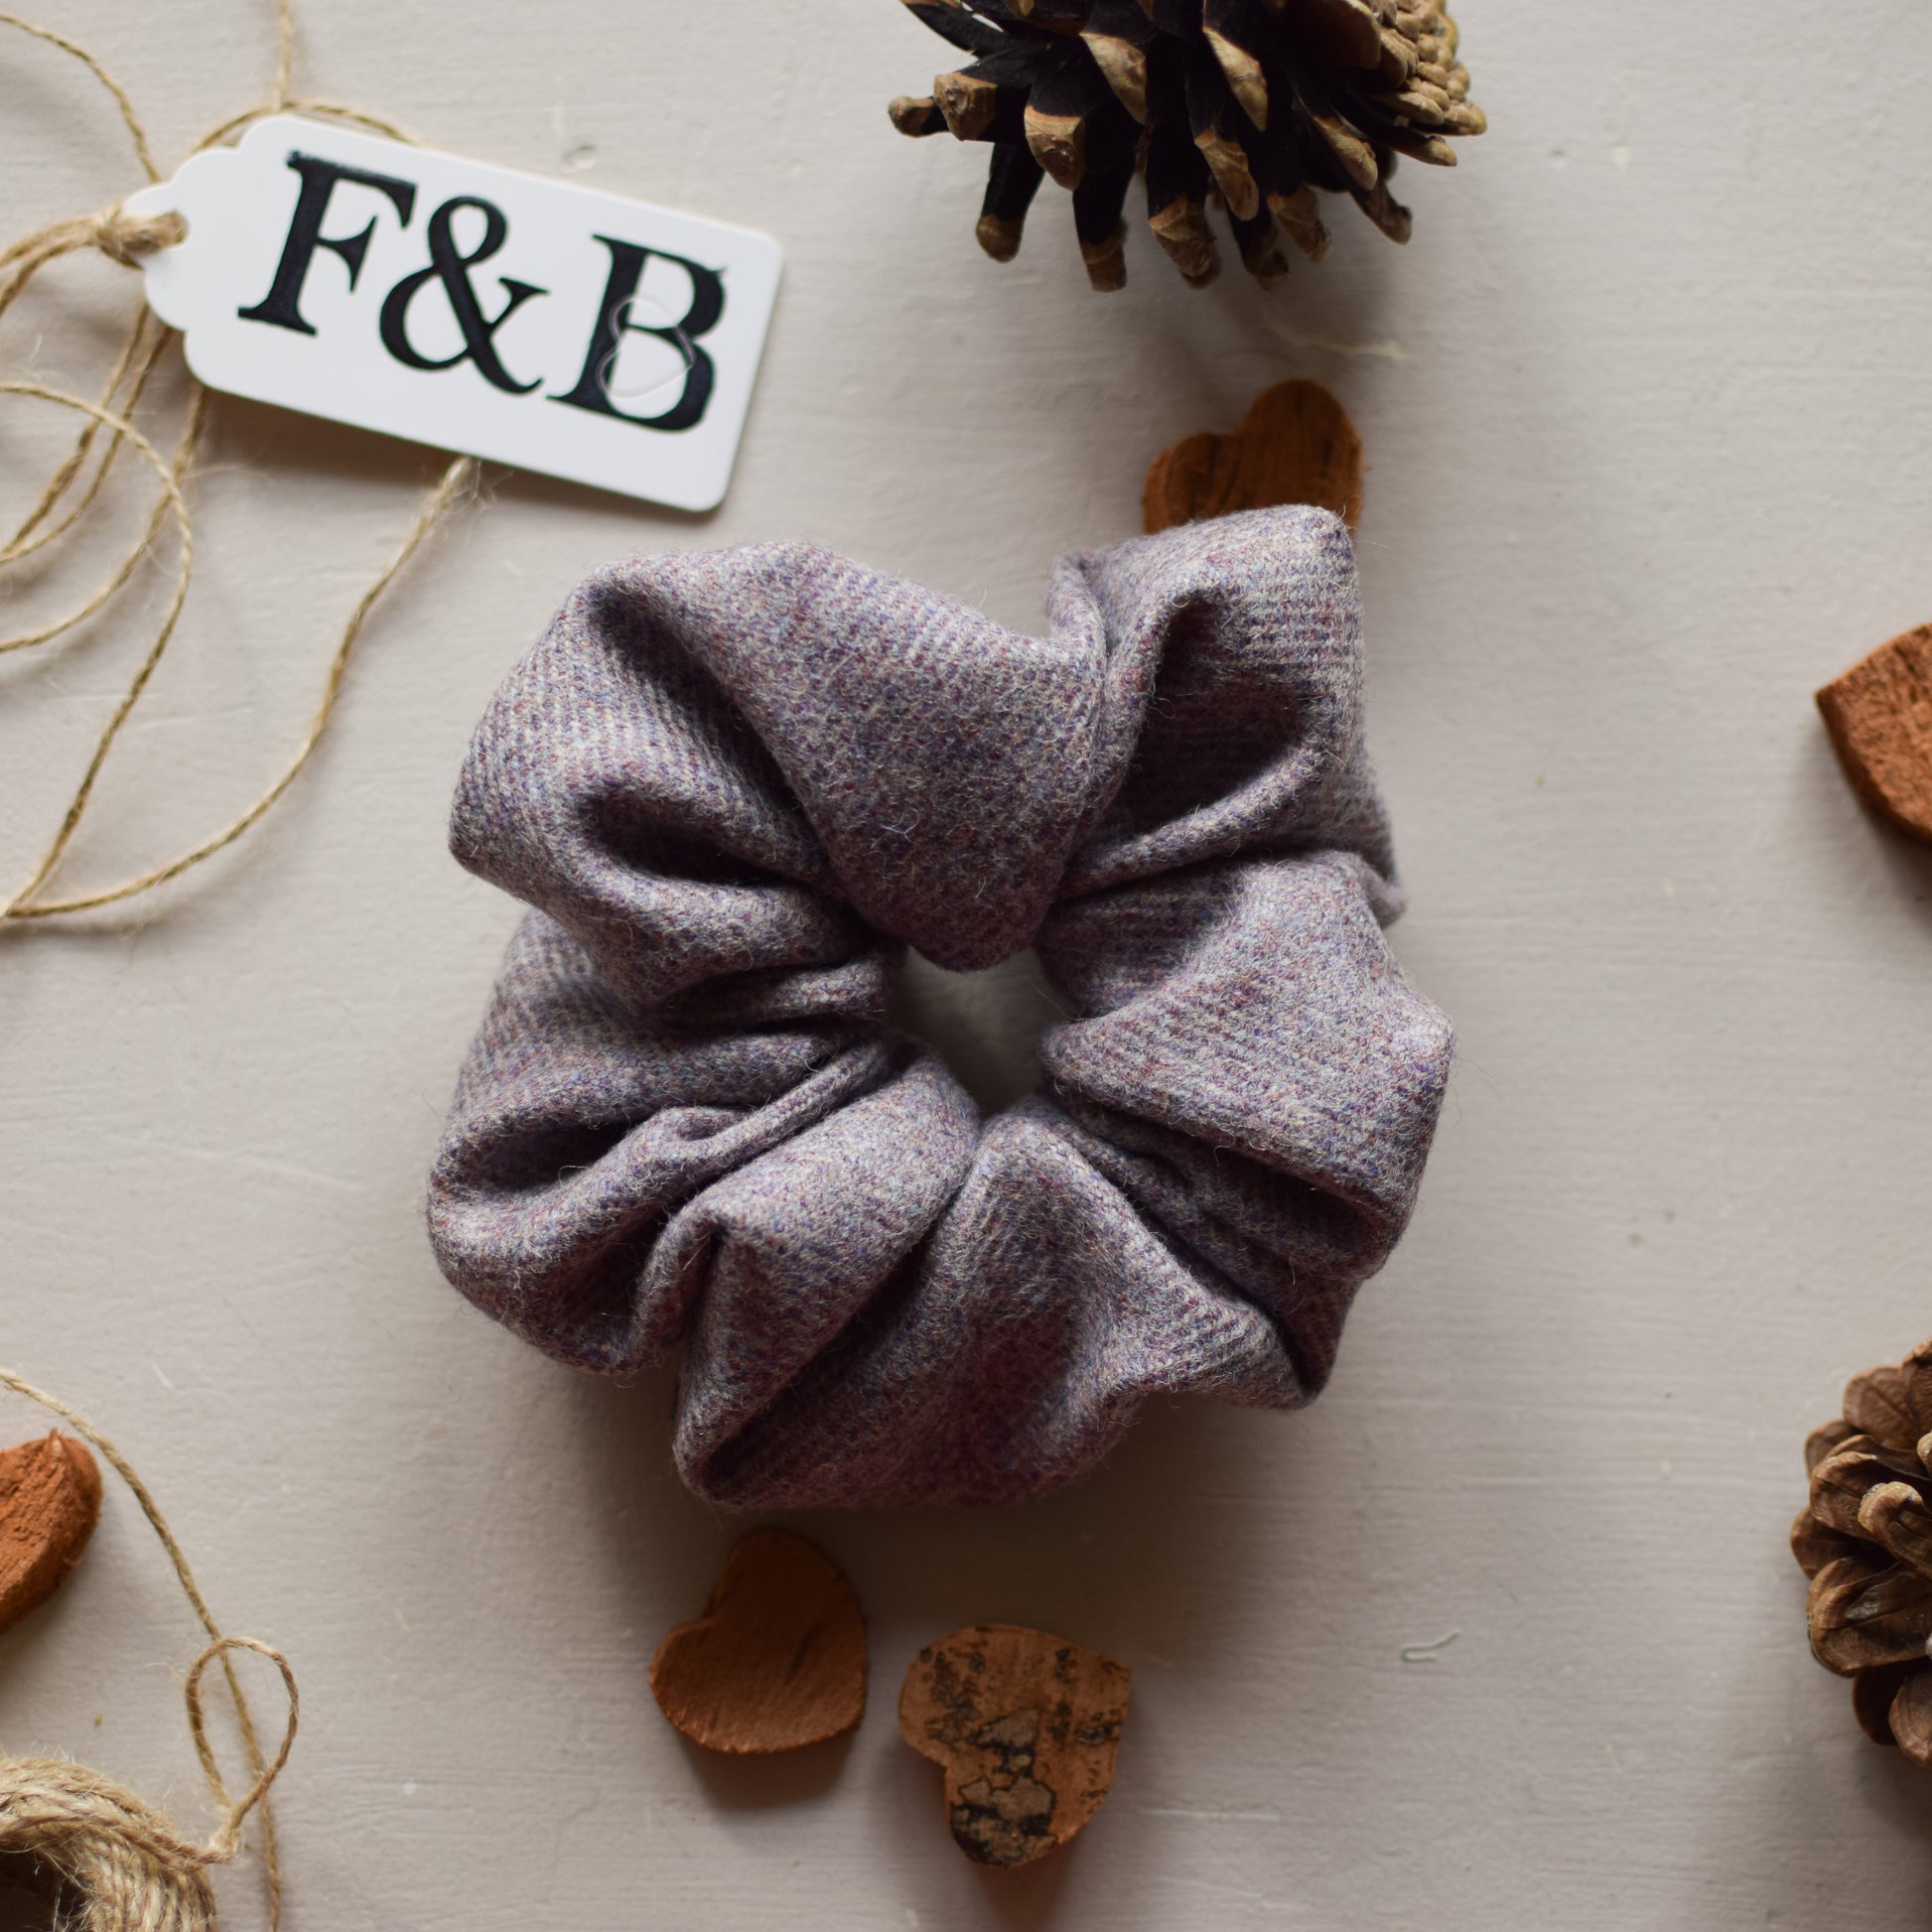 Lilac Tweed Scrunchie Handmade by F&B - Country Clothing Accessories - Quintessentially British